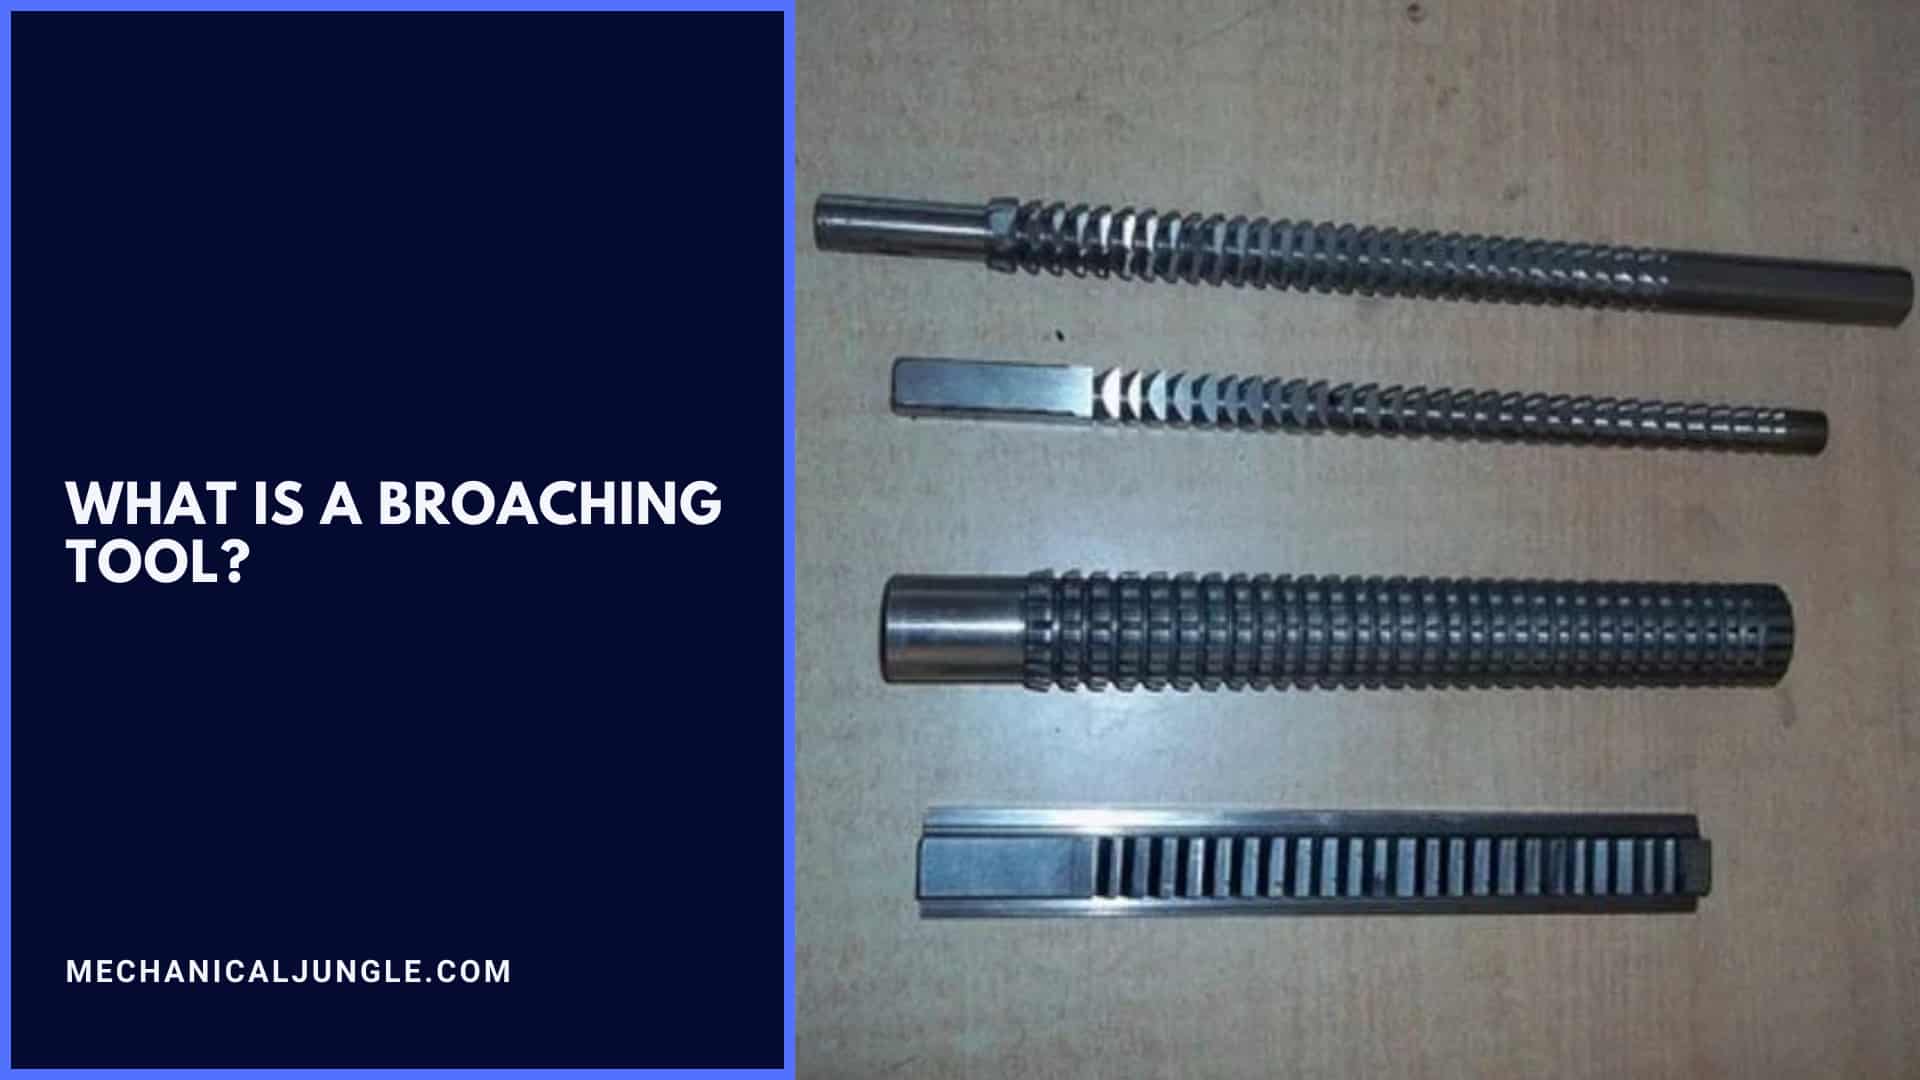 What Is a Broaching Tool?